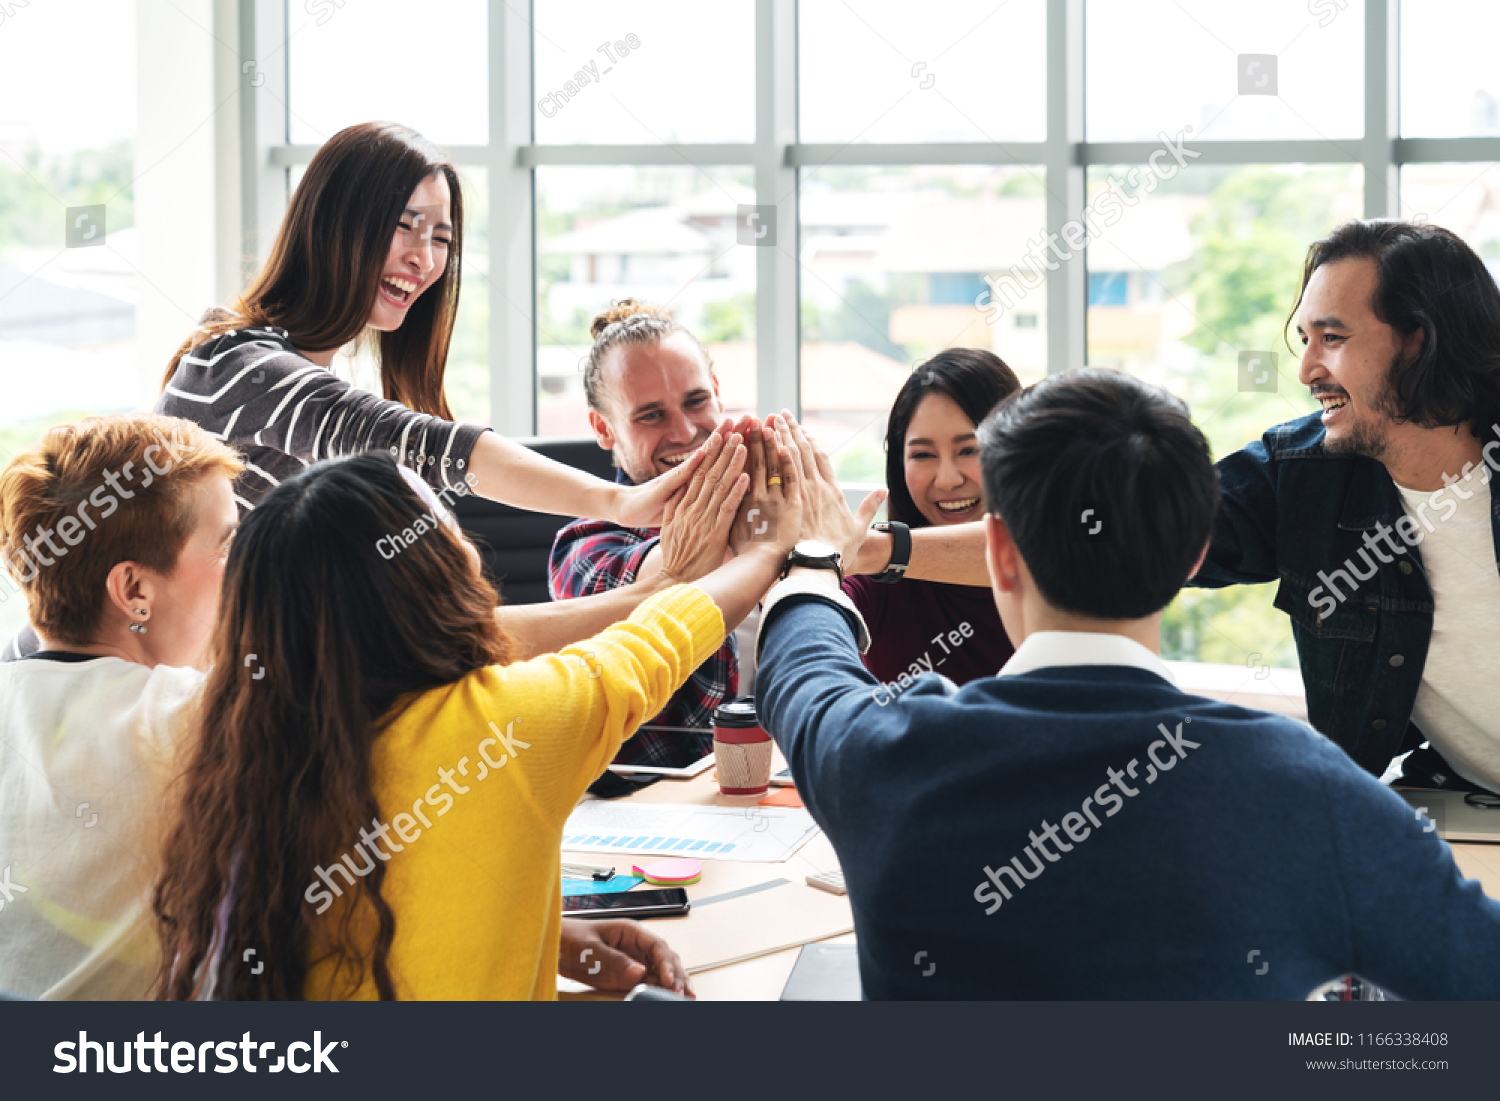 group of young multiethnic diverse people gesture hand high five, laughing and smiling together in brainstorm meeting at office. Casual business with startup teamwork community celebration concept. #1166338408